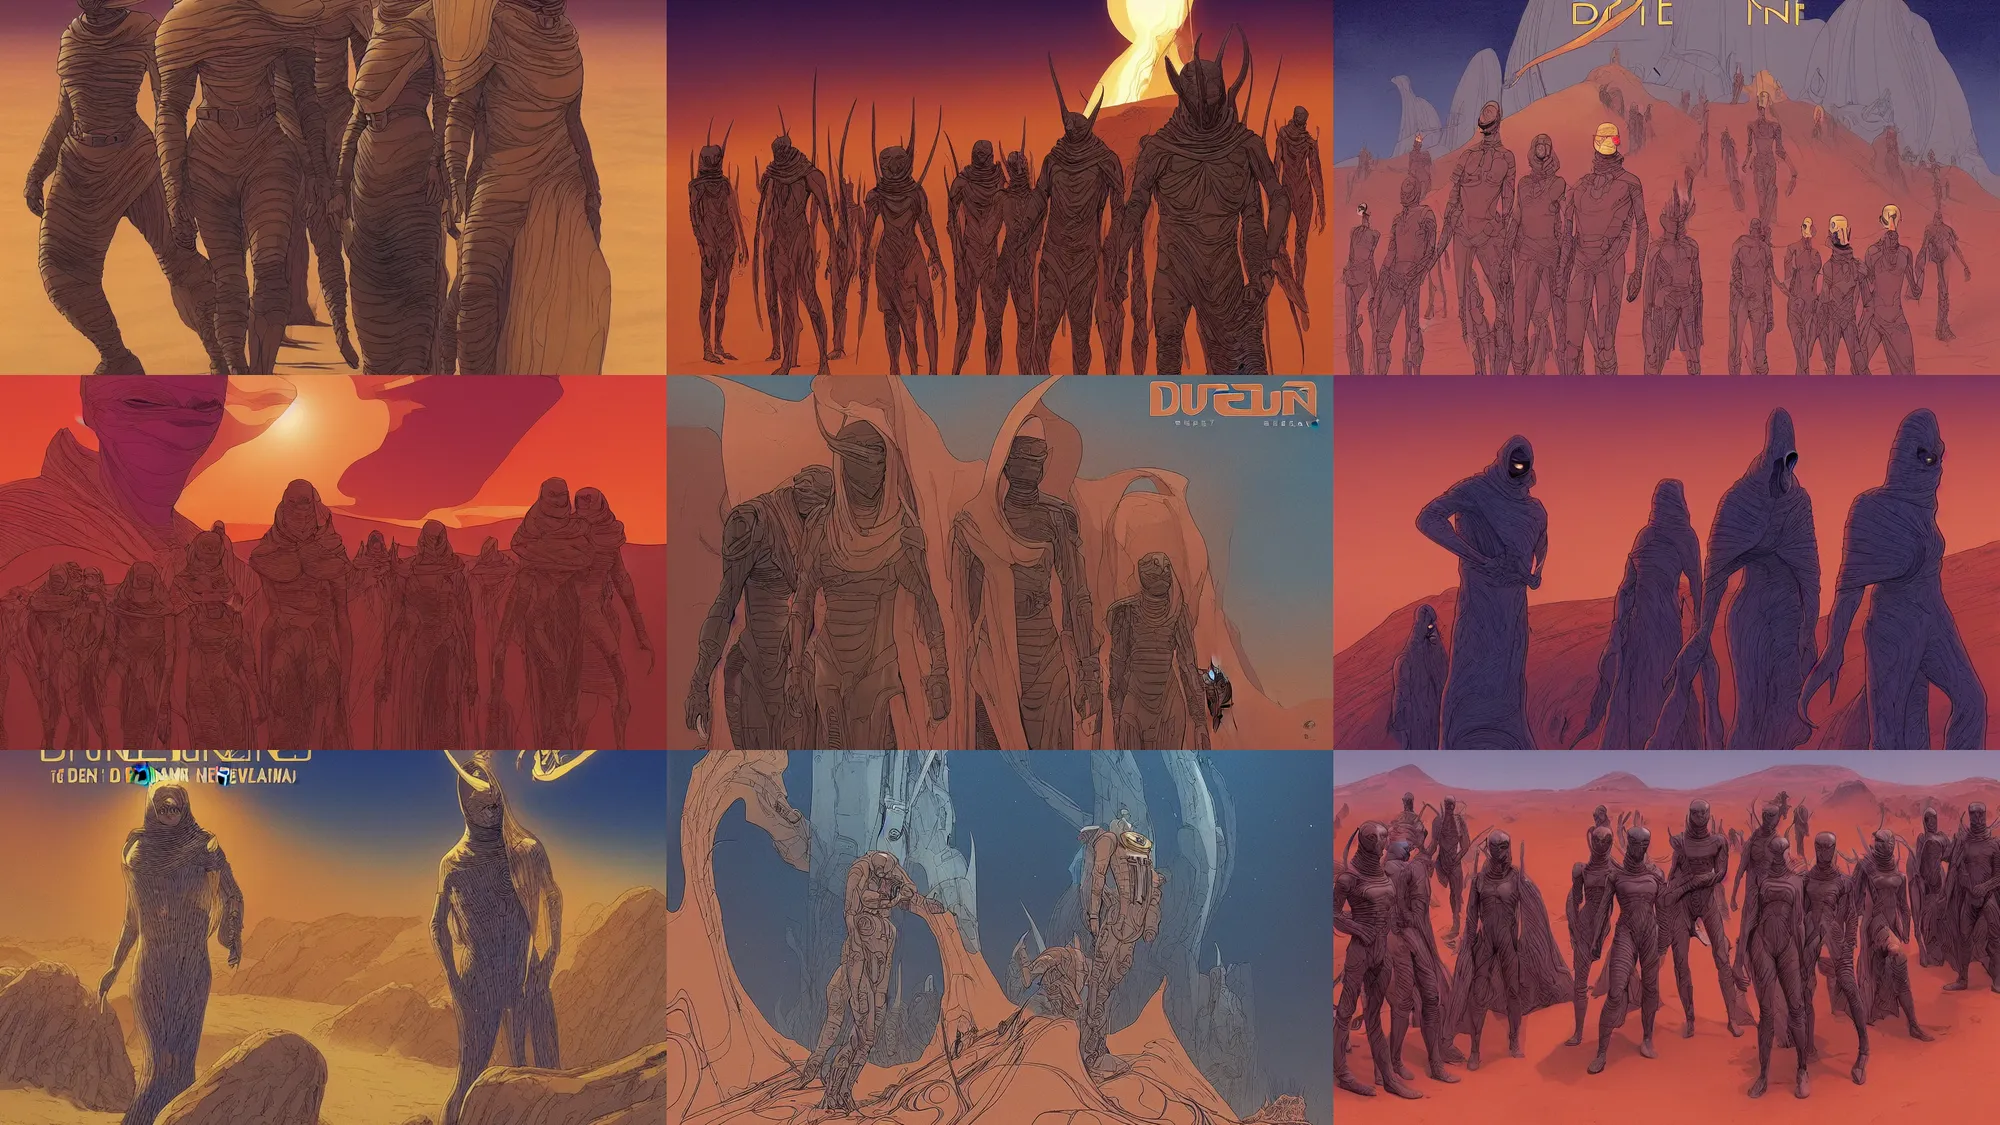 Prompt: dune 2021 by Denis Villeneuve but the Fremen are redesigned to be imaginative creative aliens by moebius, Jean Giraud, cinematic, 4k